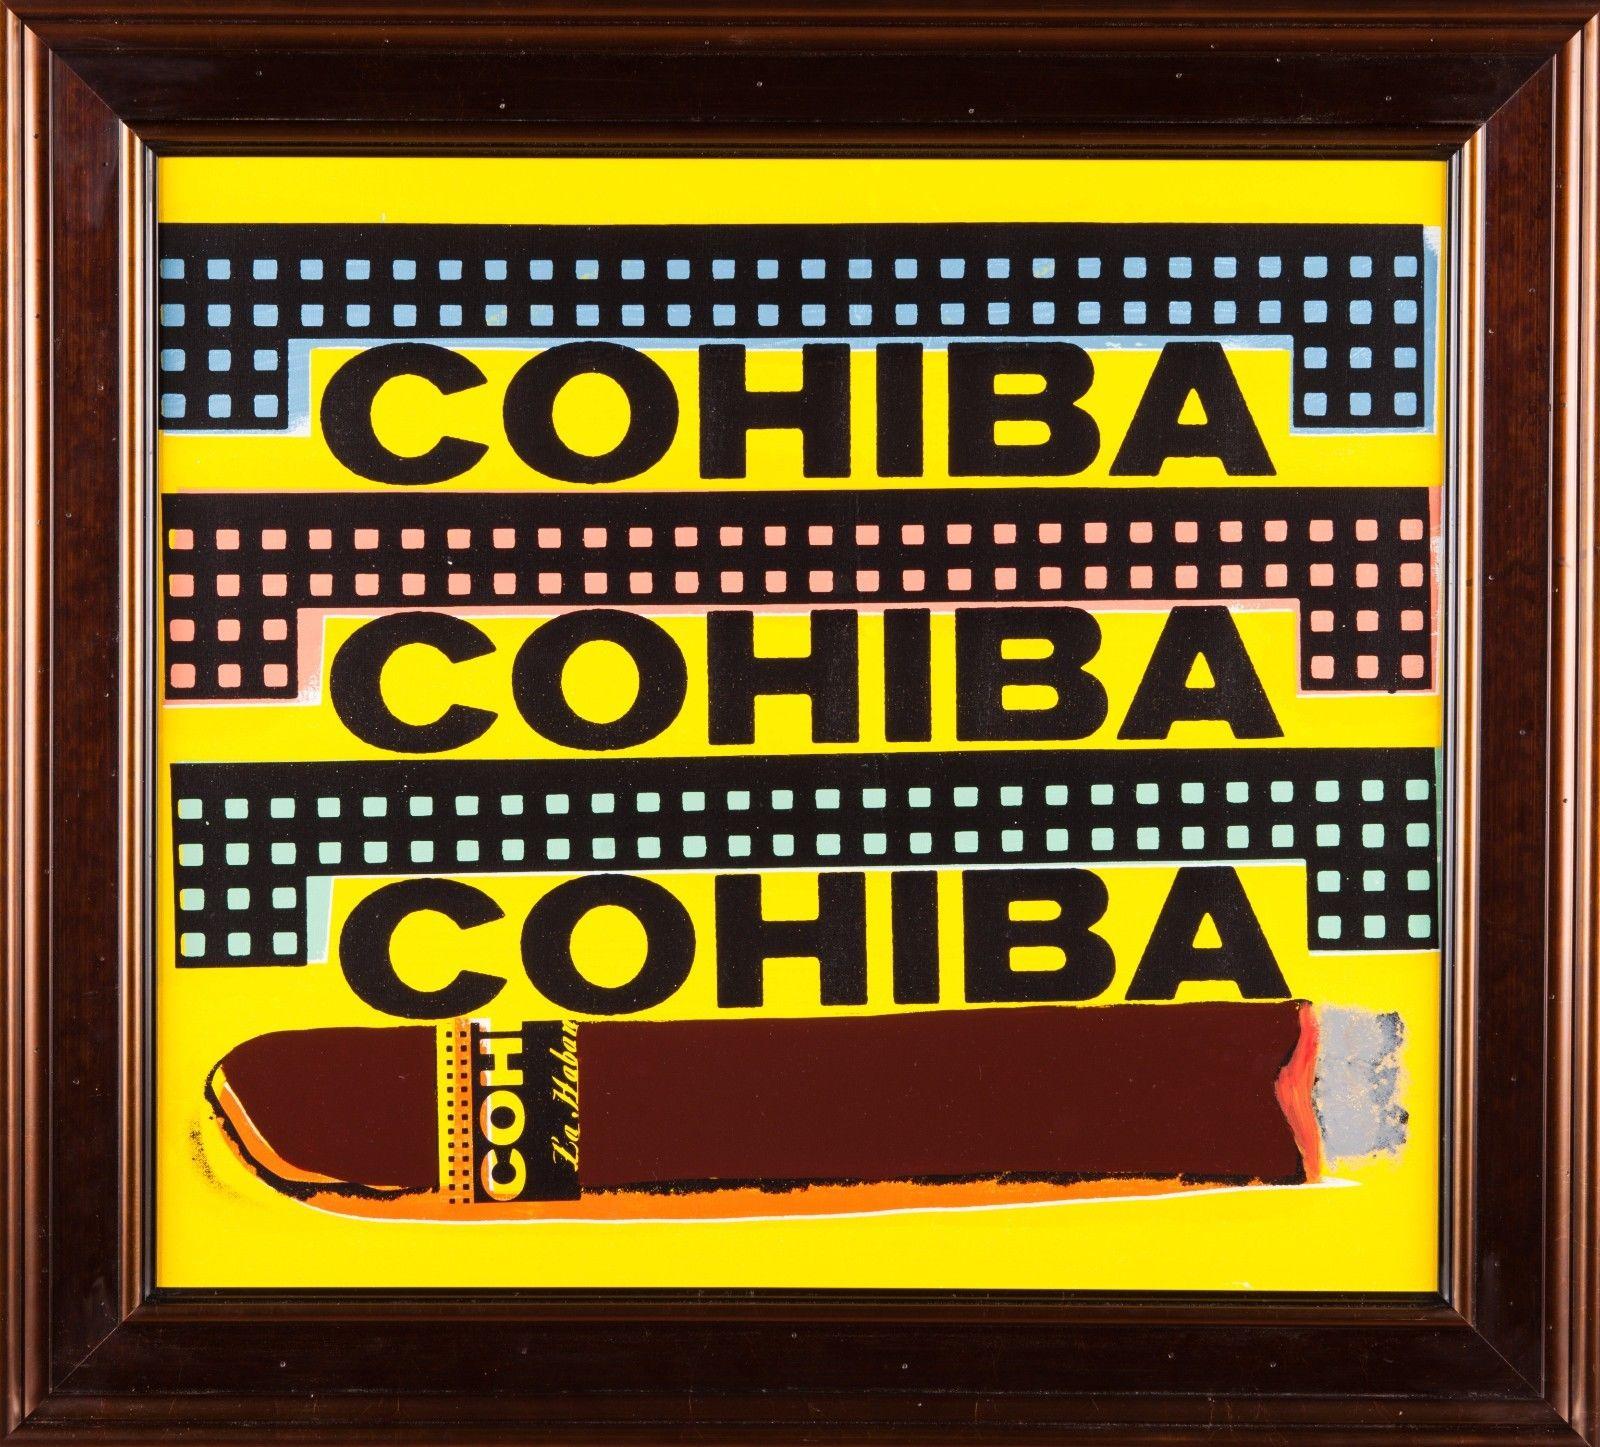 Title: Cohiba  
Medium: Original Oil Painting on Screen print Canvas 
Size: 28 1/2" X 31 1/2"   
Size Framed: 23 1/8" X 26 3/8"  
Edition size: Limited edition 28/50 PP   

This piece is simply amazing with a rich tobacco colored frame to go with